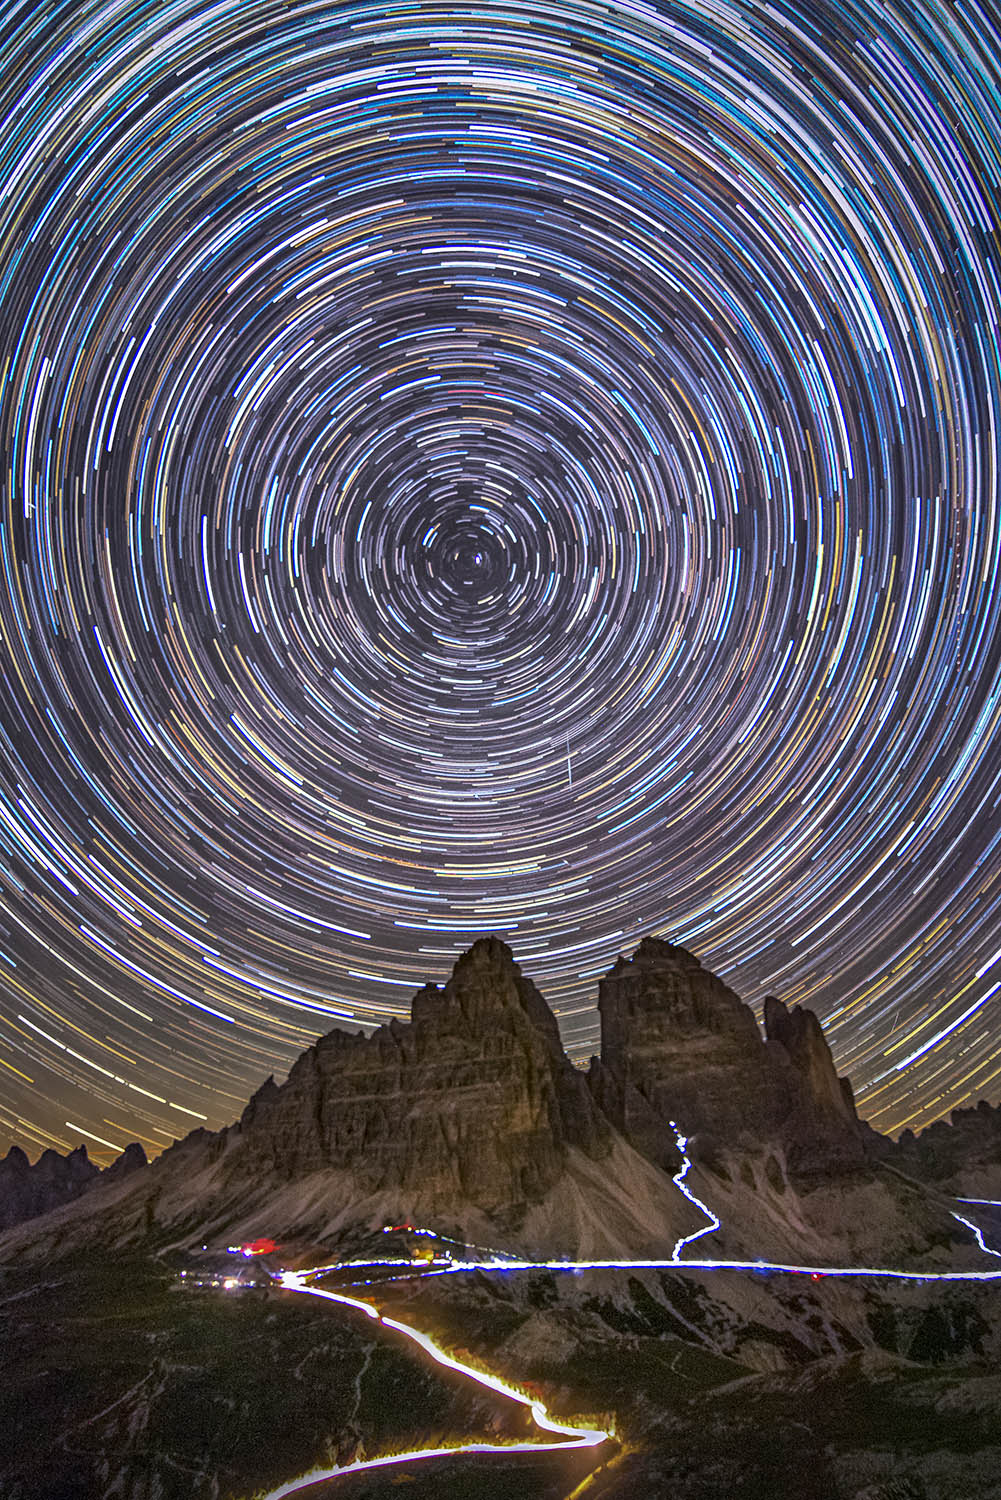 Circular star trails in the sky above a mountain peak.